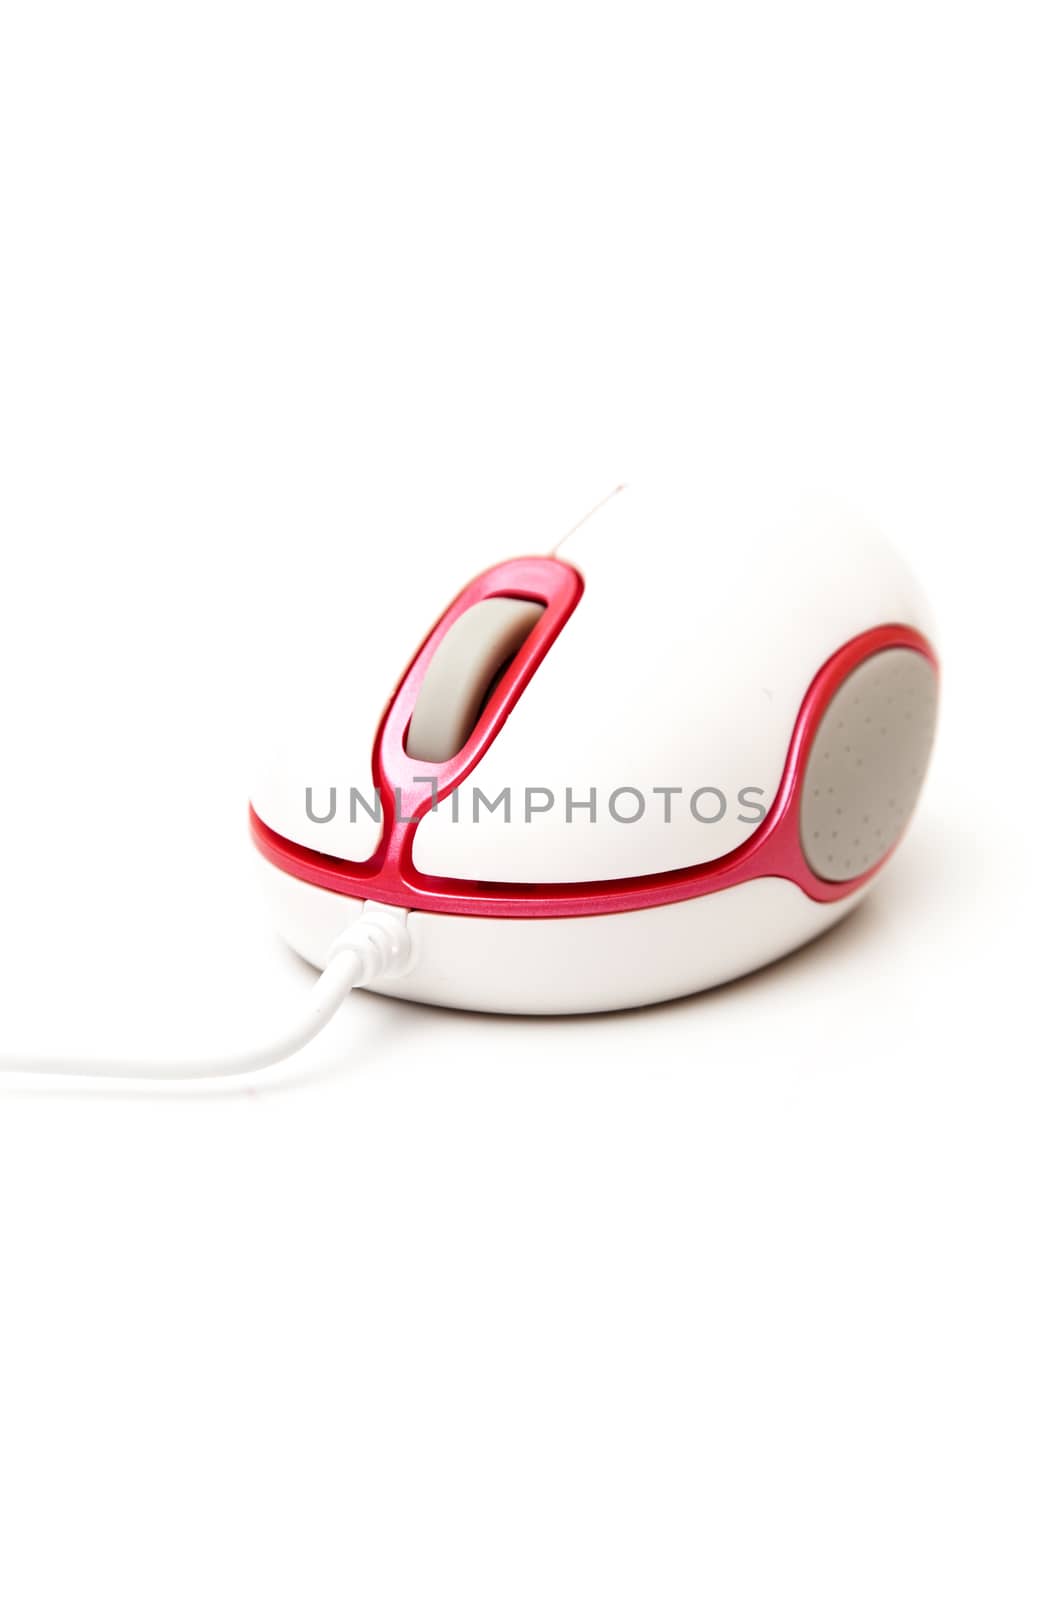 Computer mouse on a white background